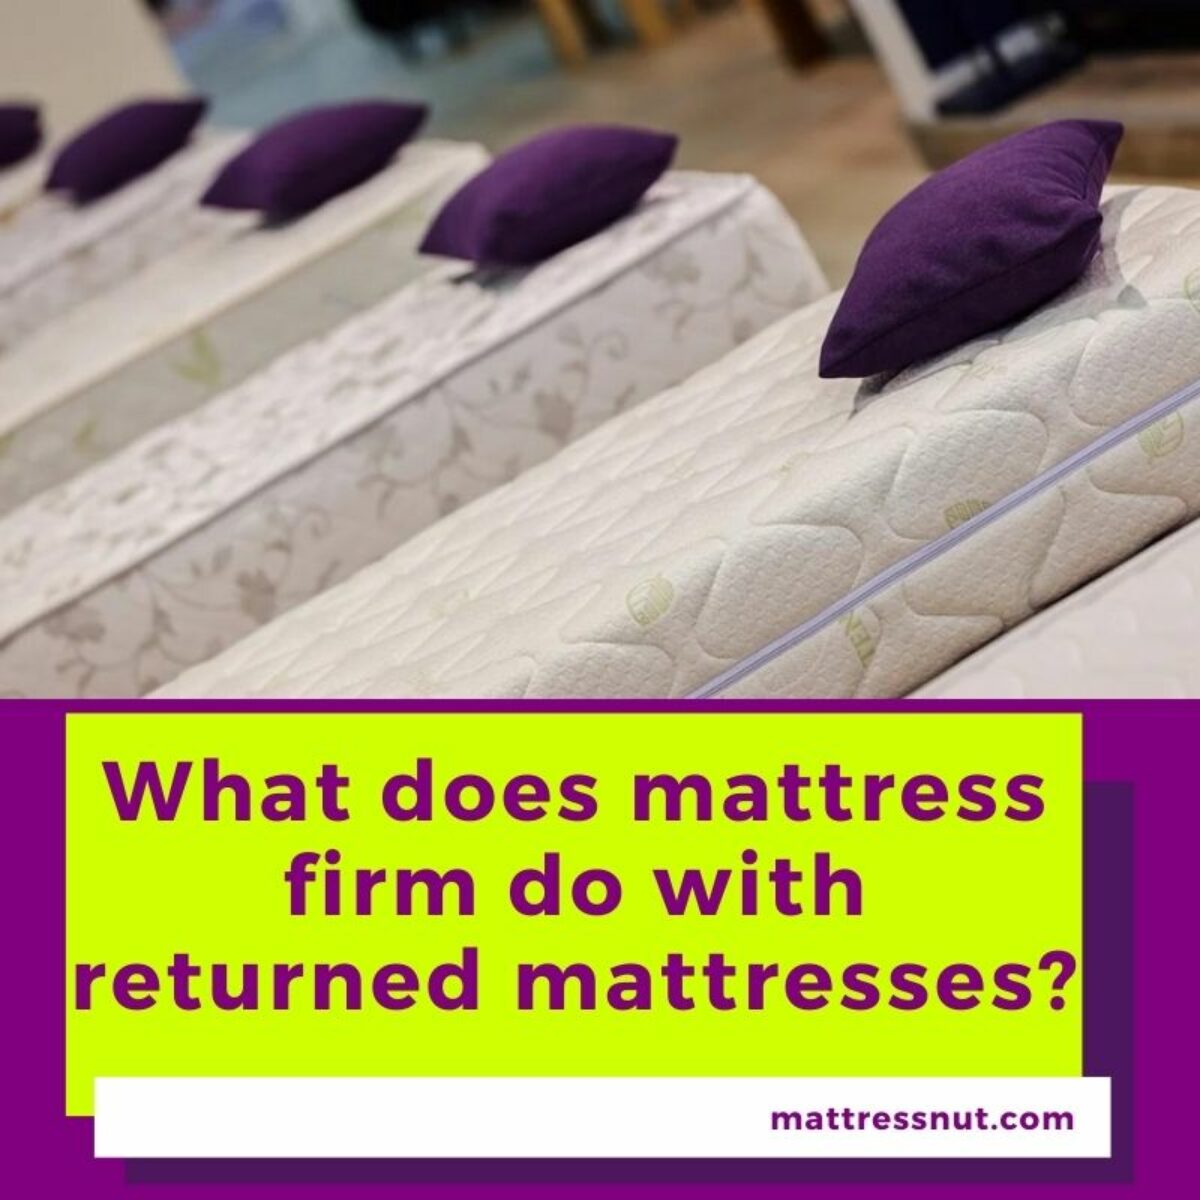 What Happens To Returned Mattresses?